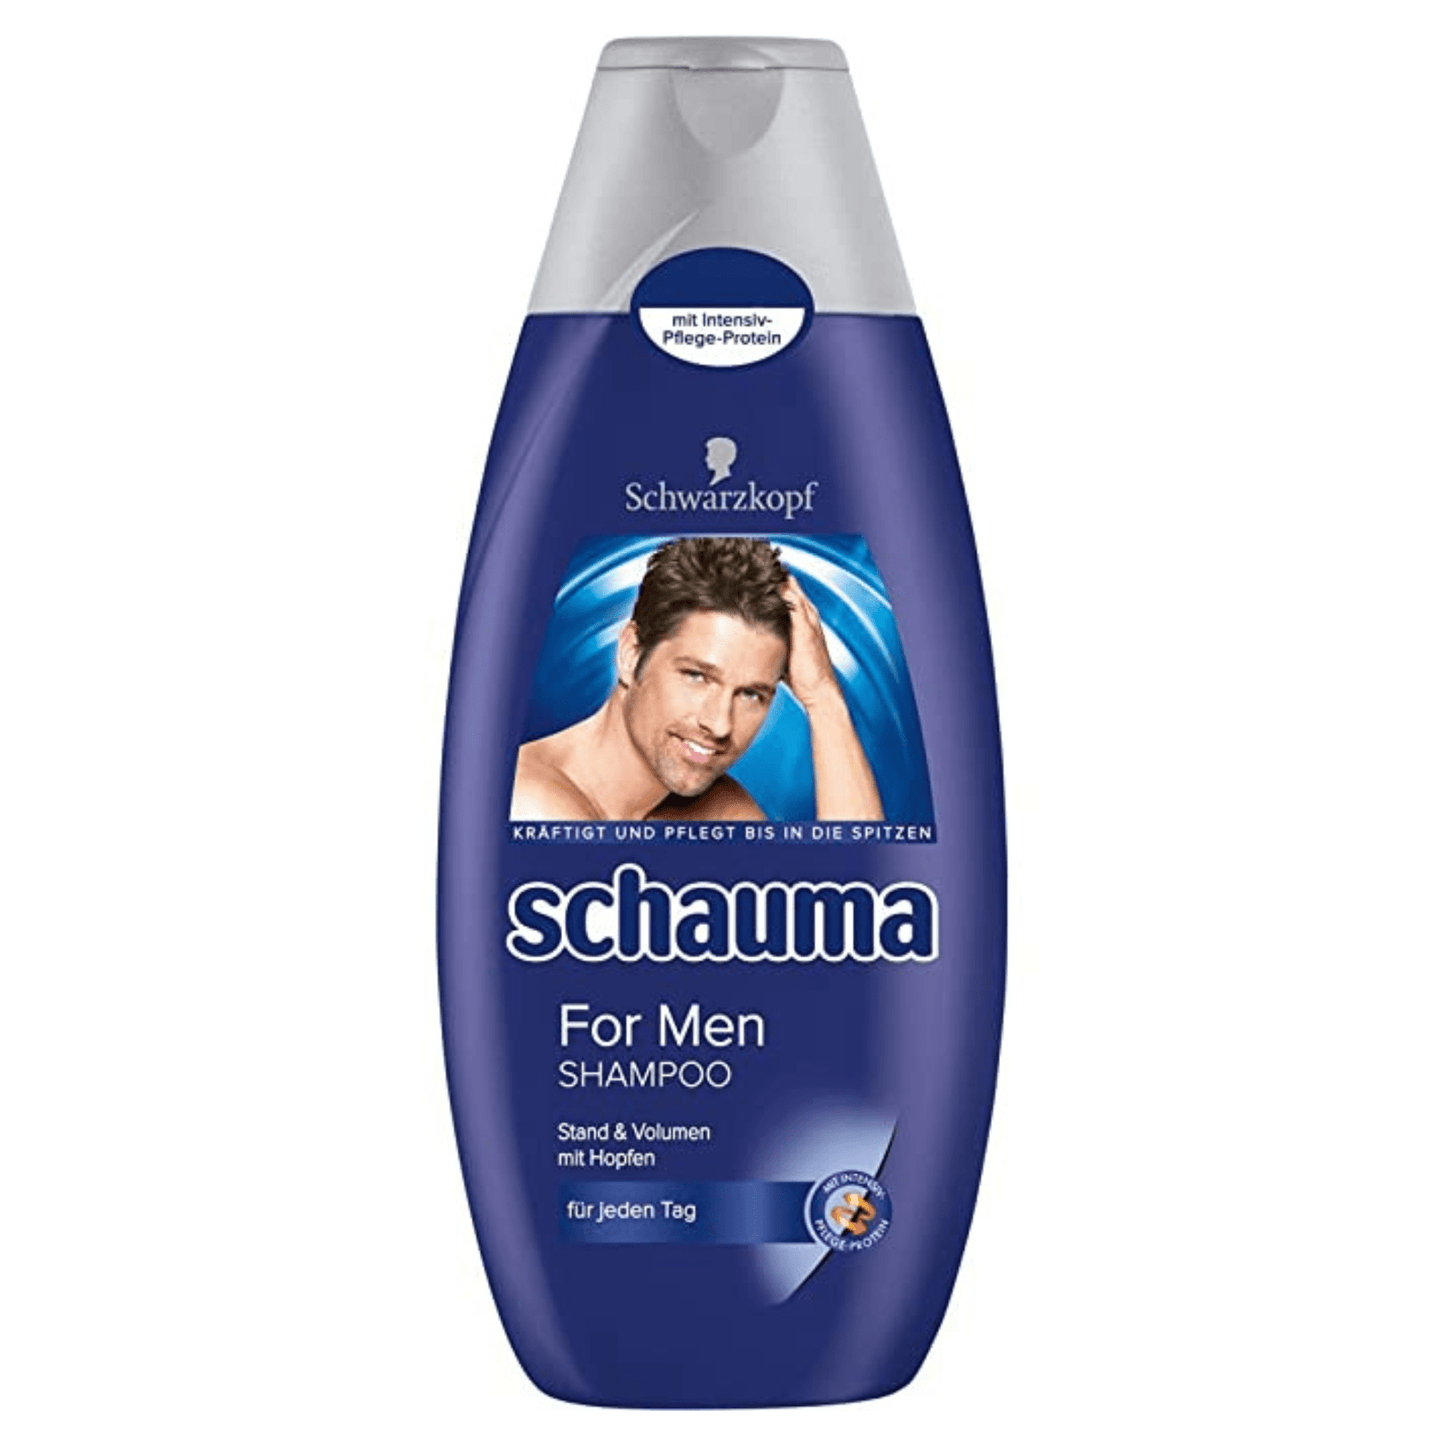 Primary Image of Shampoo For Men